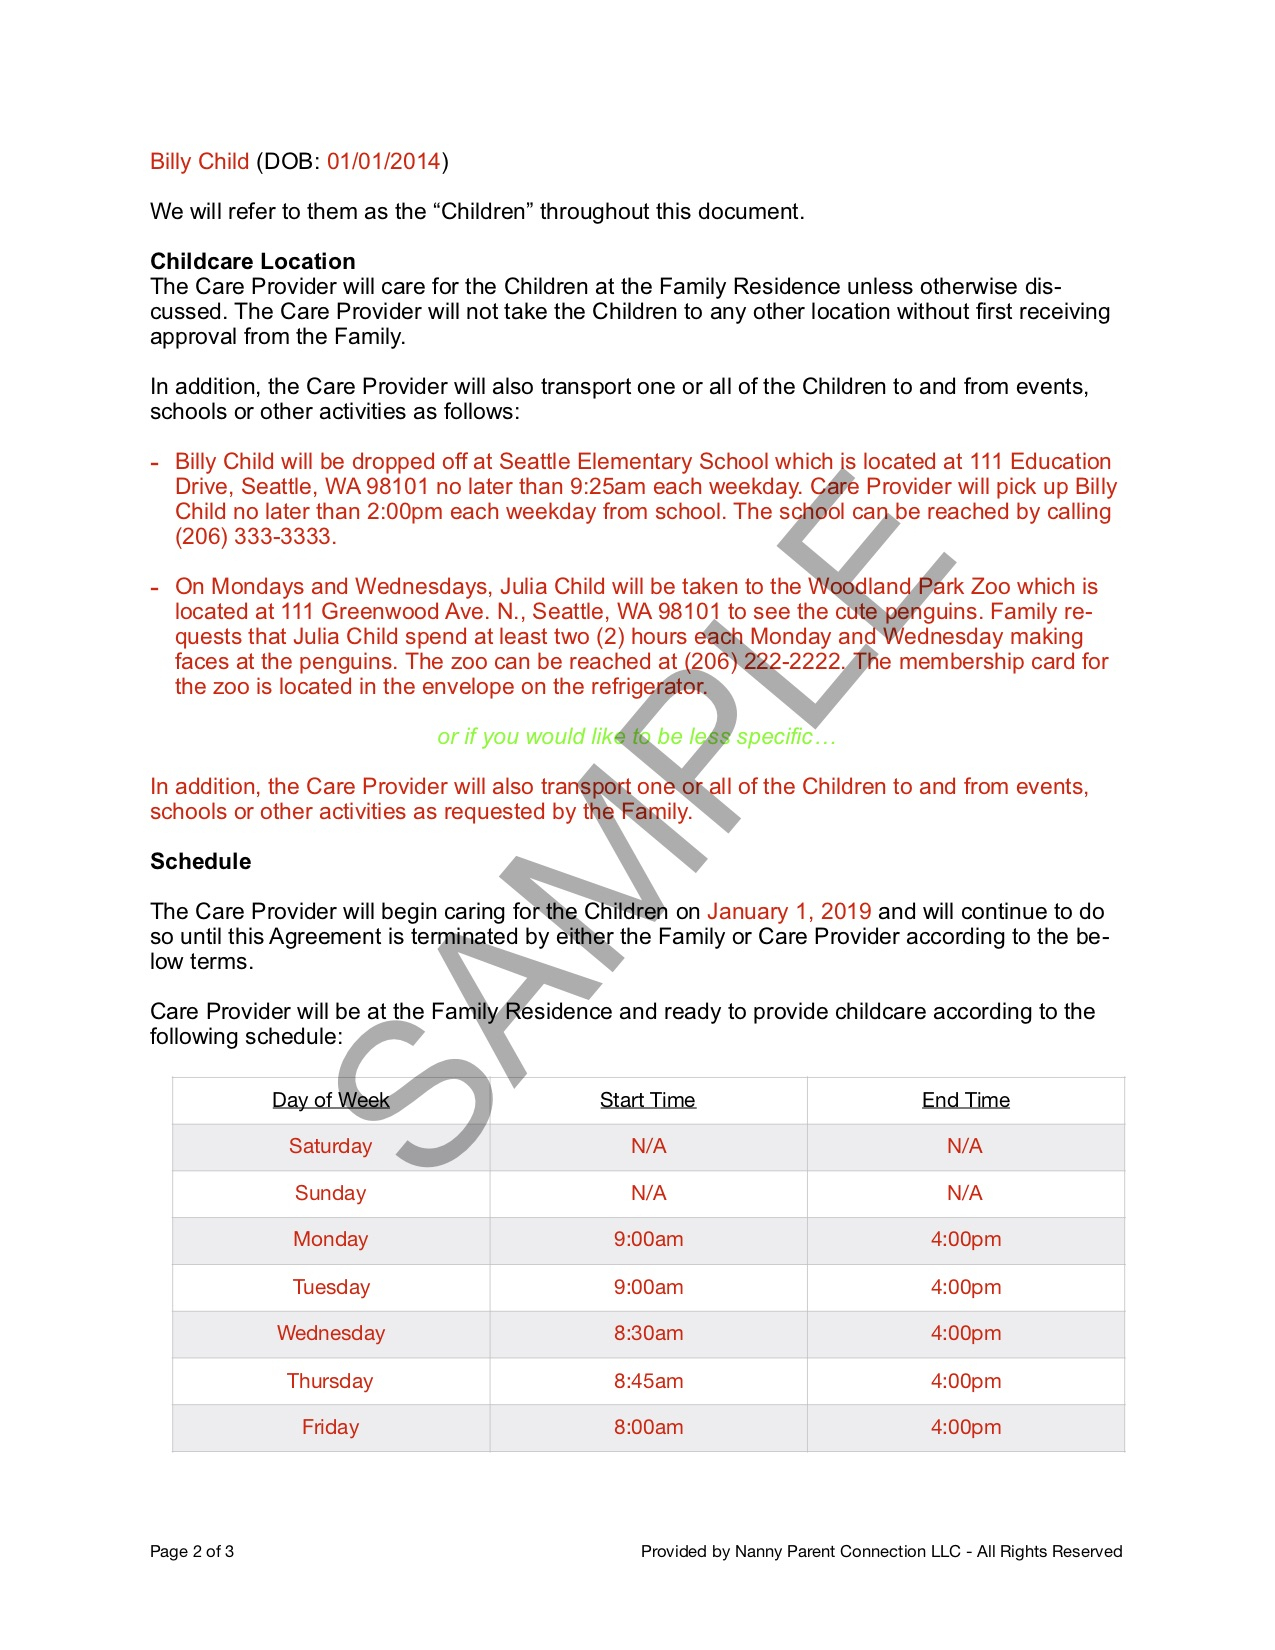 Household Employee Agreement | Nanny Parent Connection With Nanny Contract Template Word